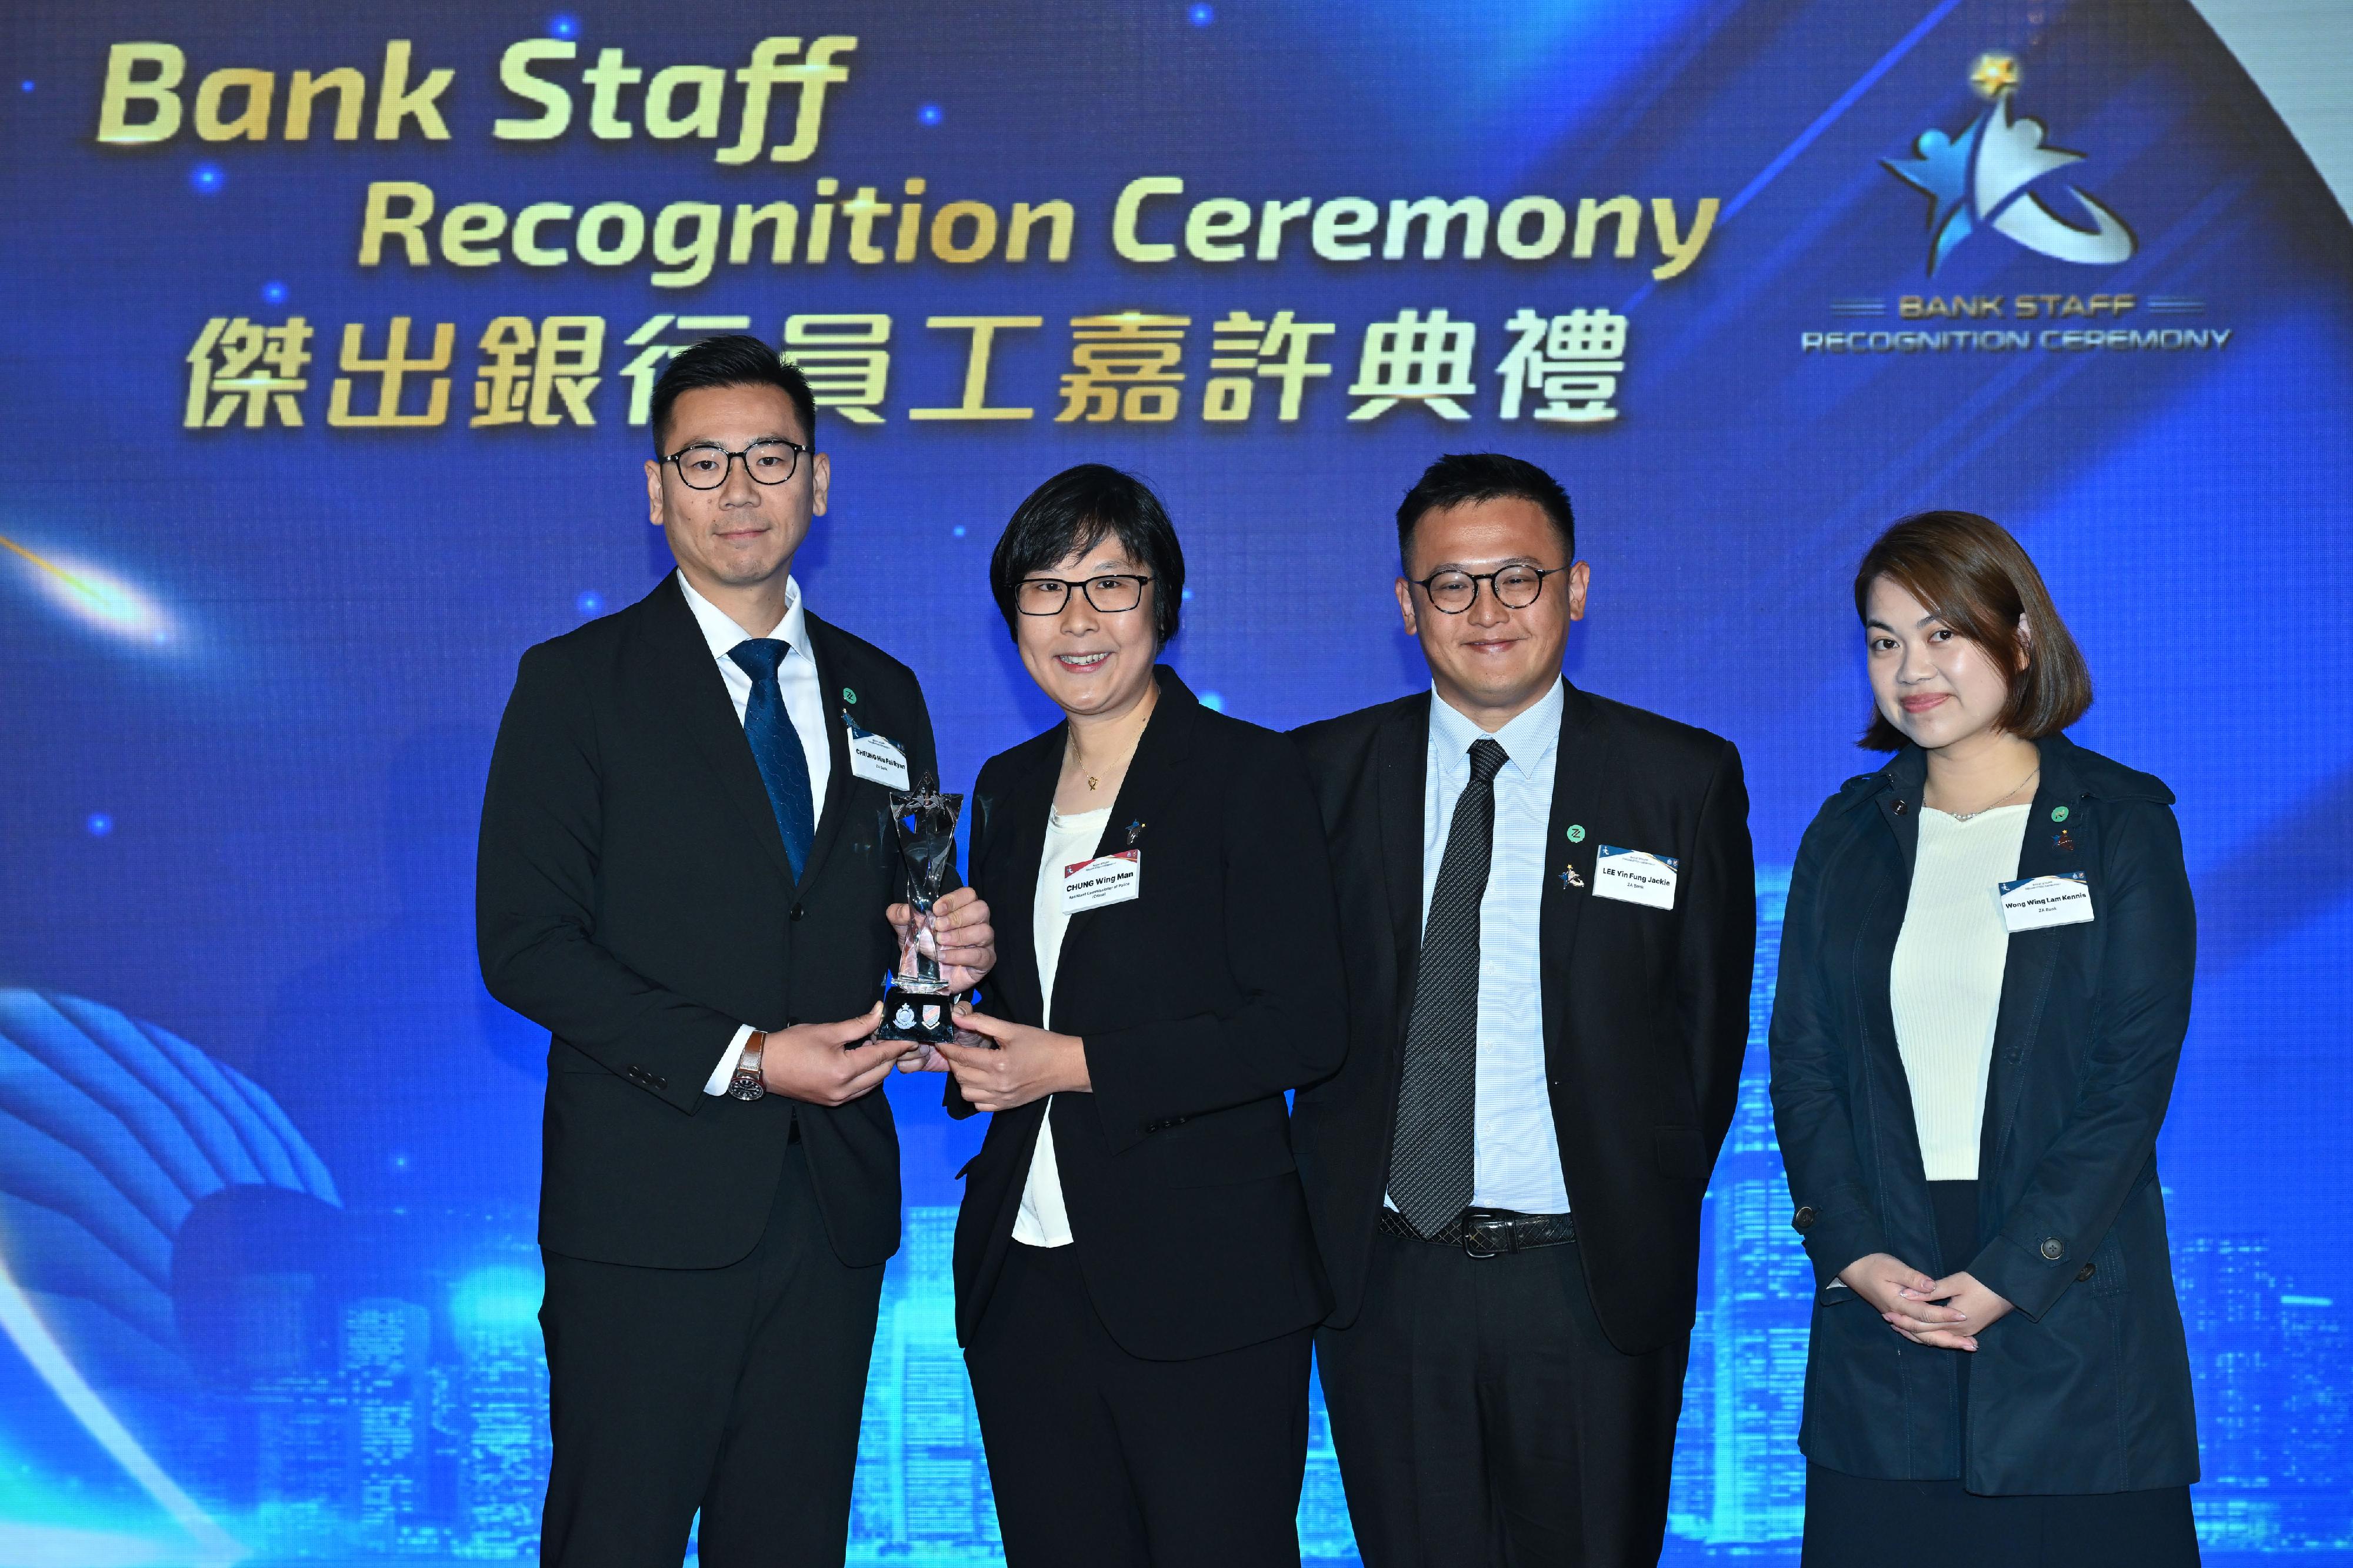 The Bank Staff Recognition Ceremony organised by the Hong Kong Police Force was held today (March 22). Photo shows the Assistant Commissioner of Police (Crime), Ms Chung Wing-man (second left) presenting the Effective Regtech Application Award to the bank representatives.